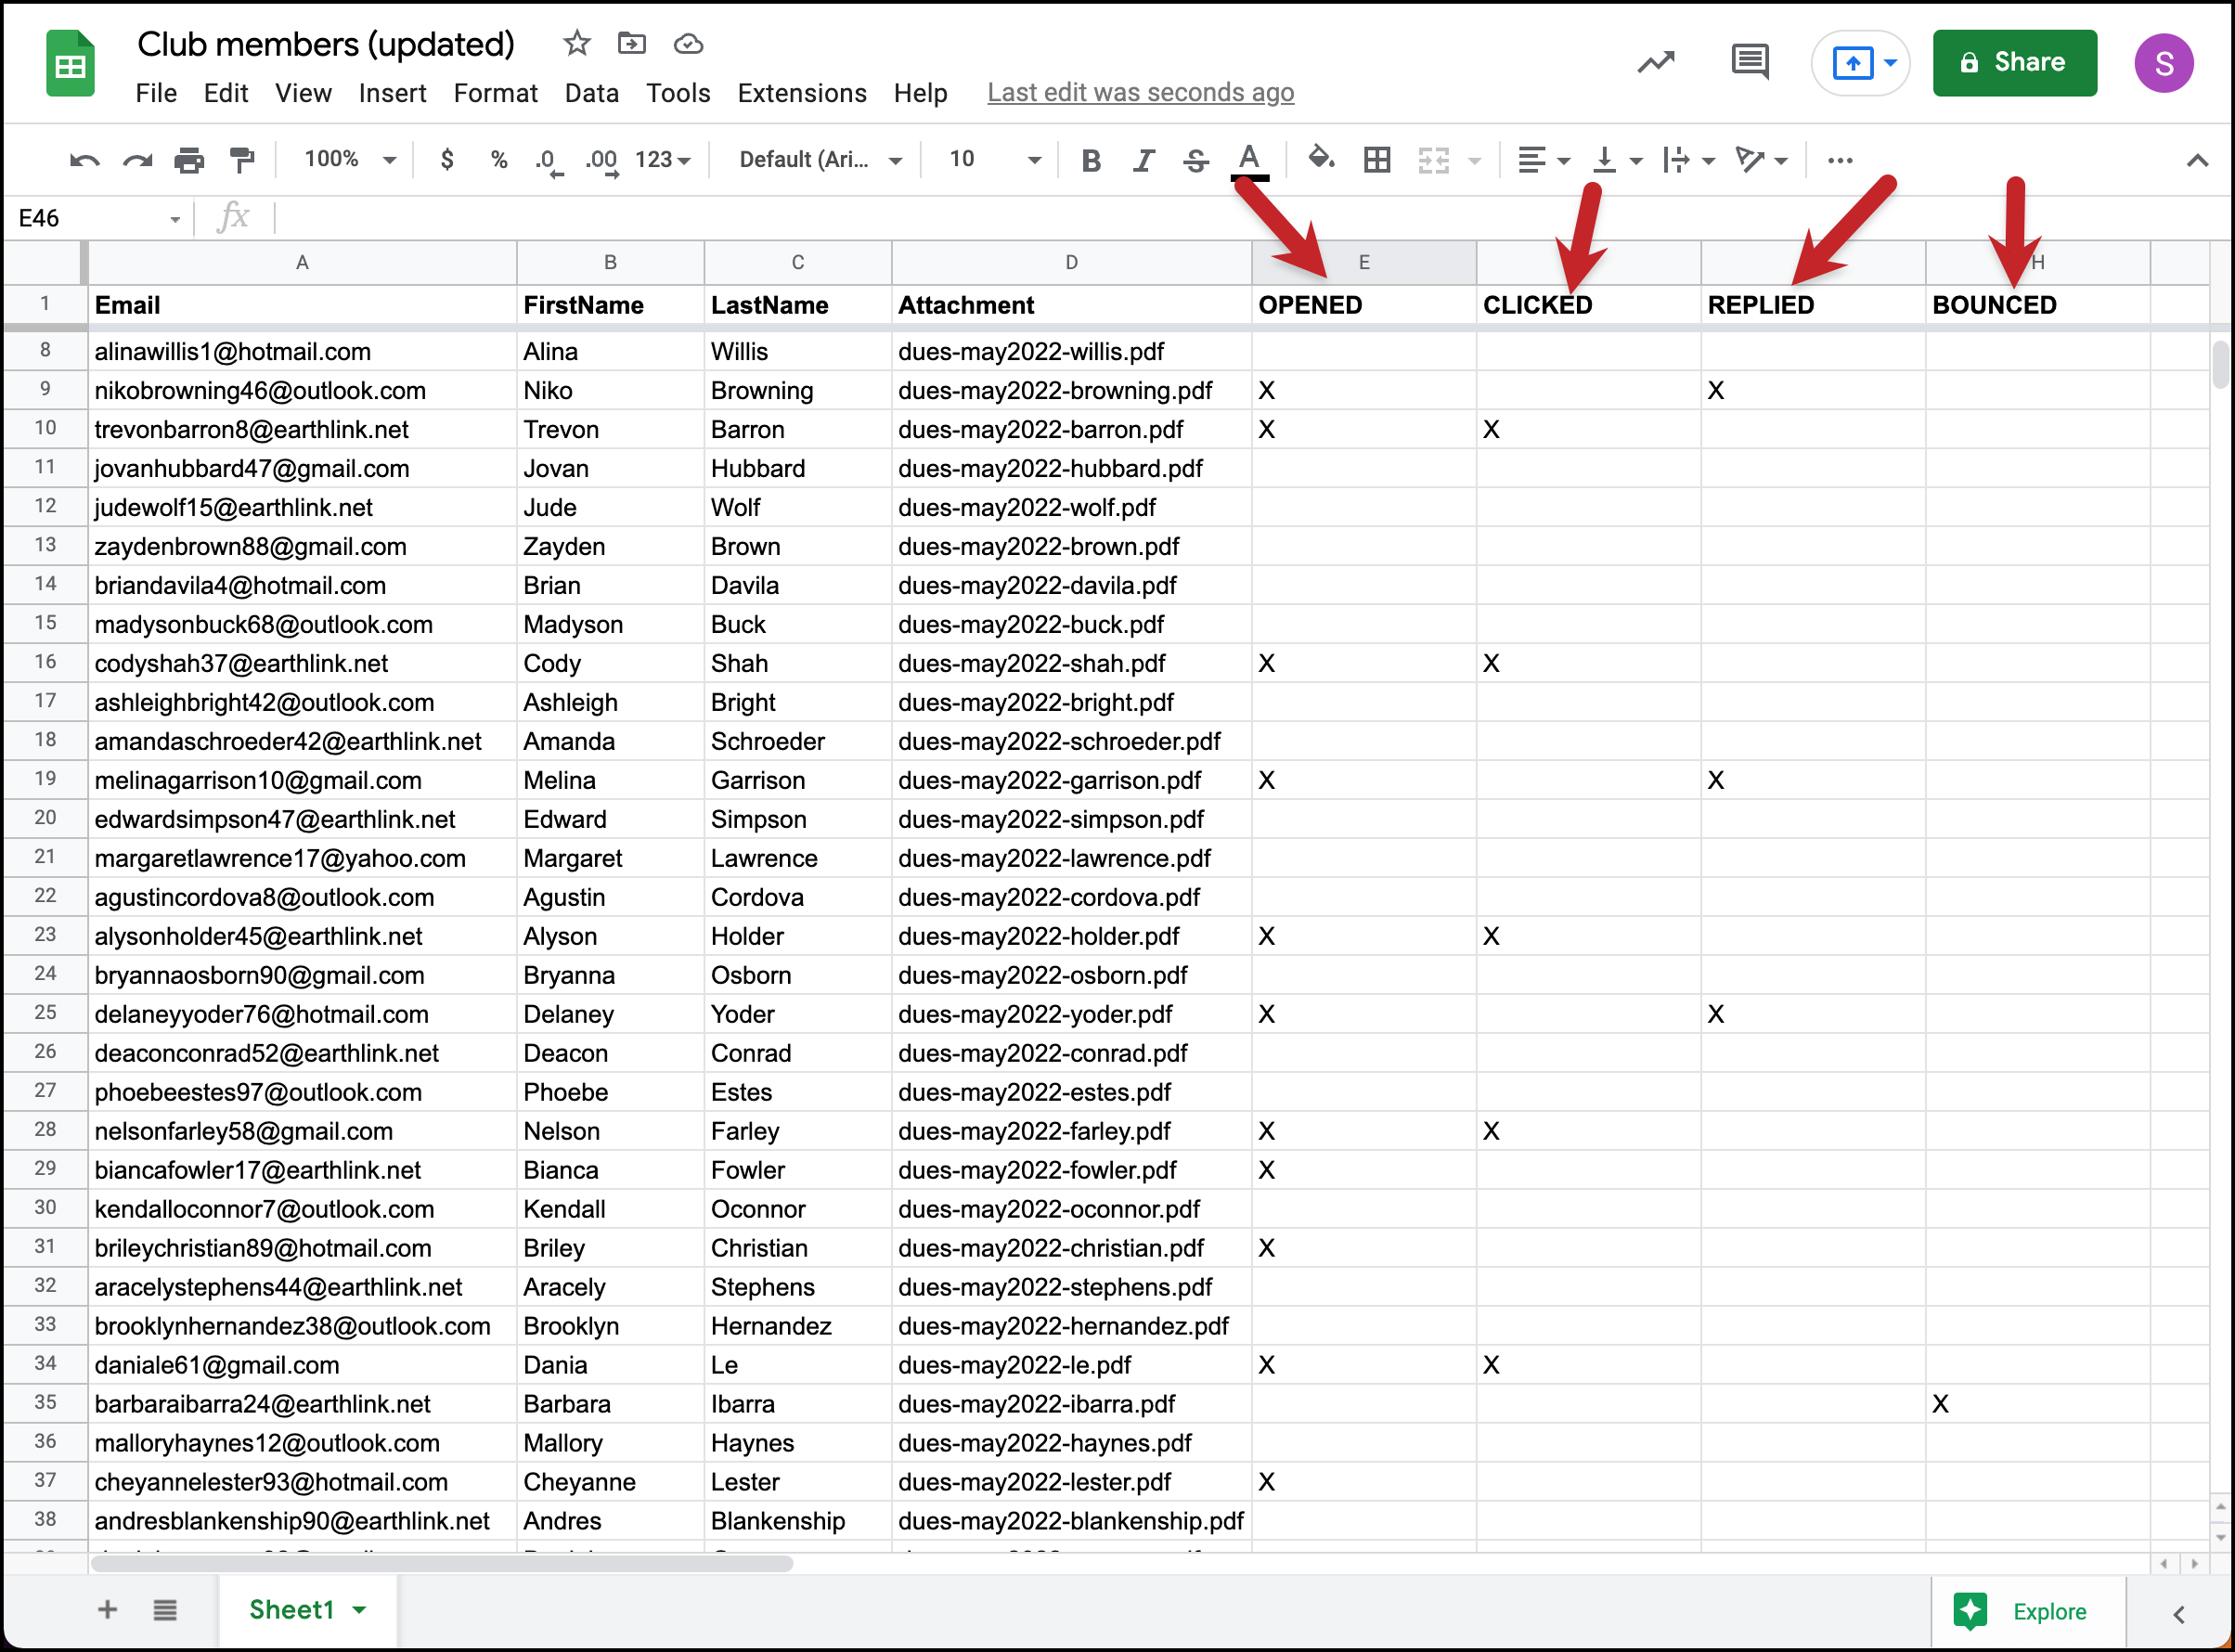 Campaign reporting data is written back to the Google Sheet.